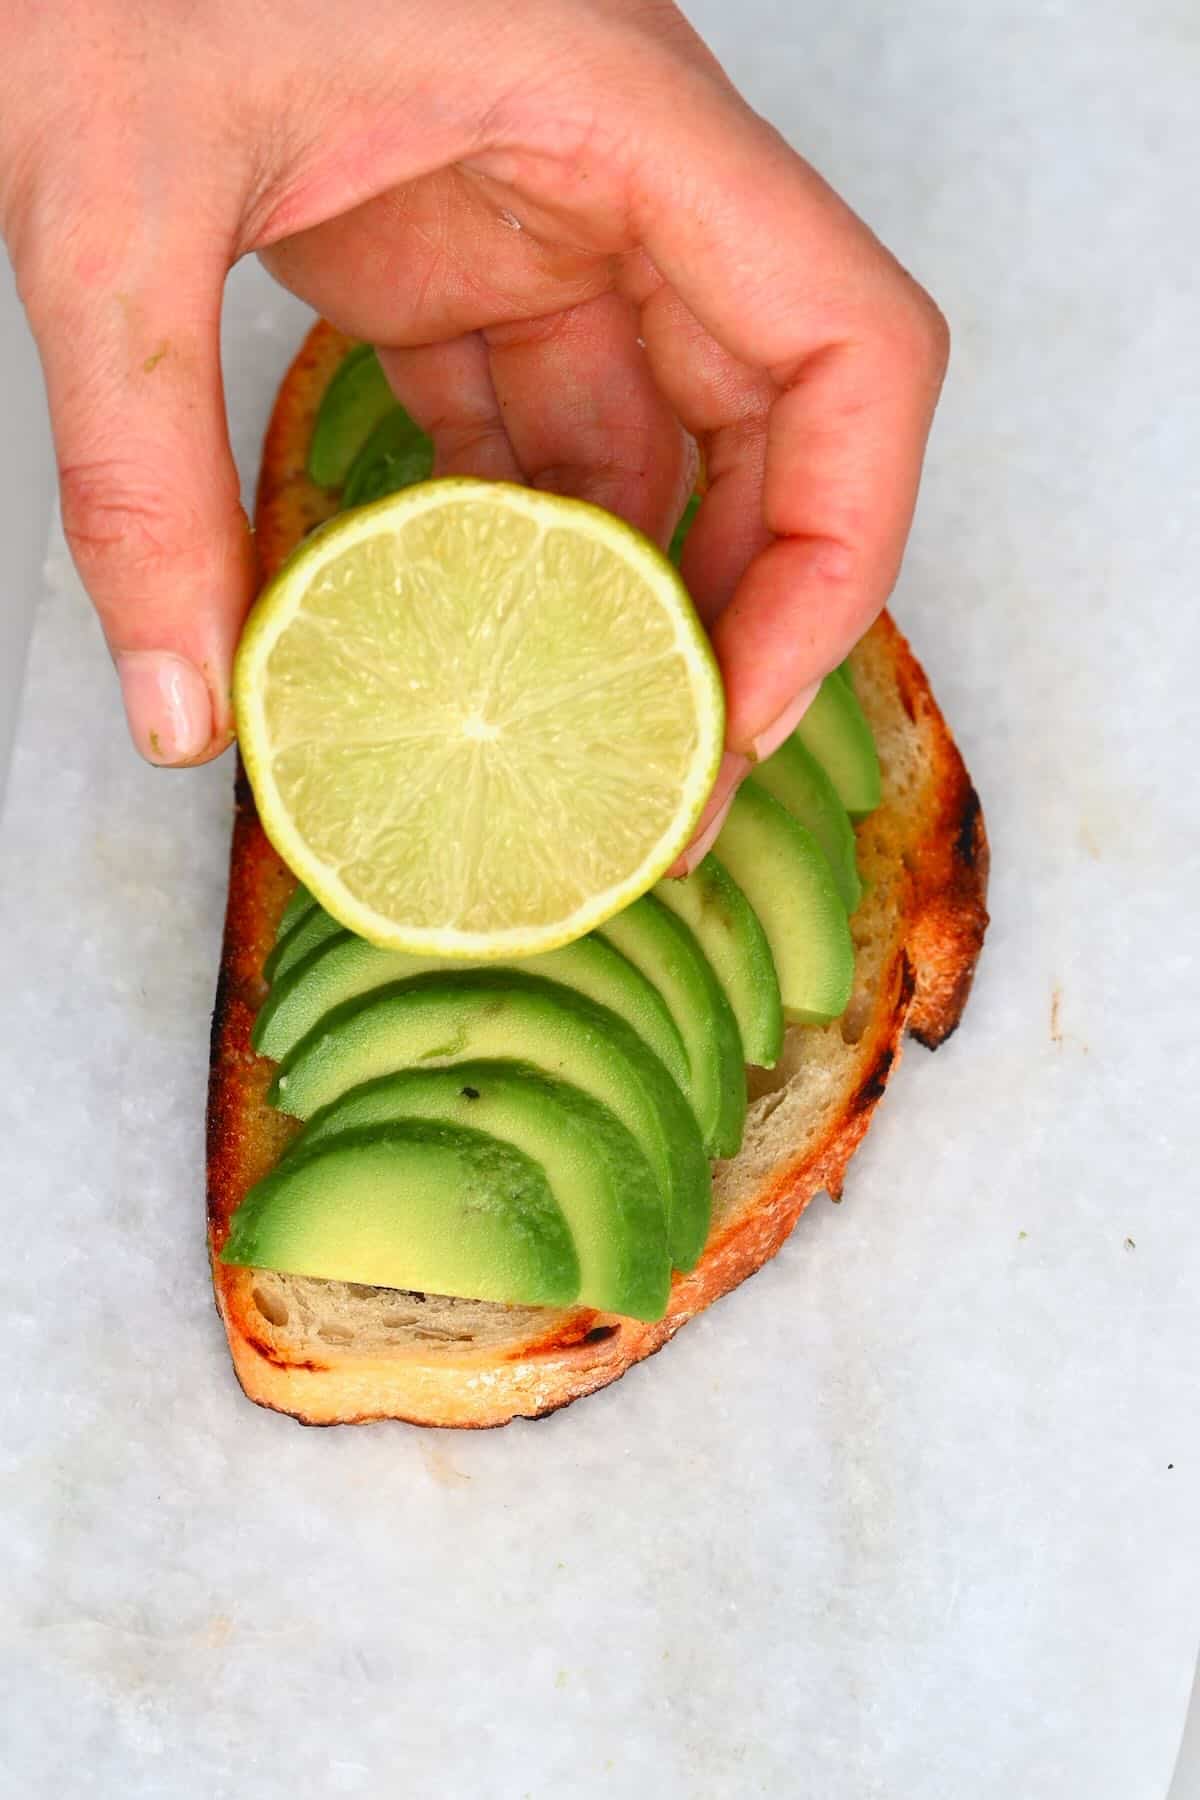 Drizzling lime juice over an avocado toast